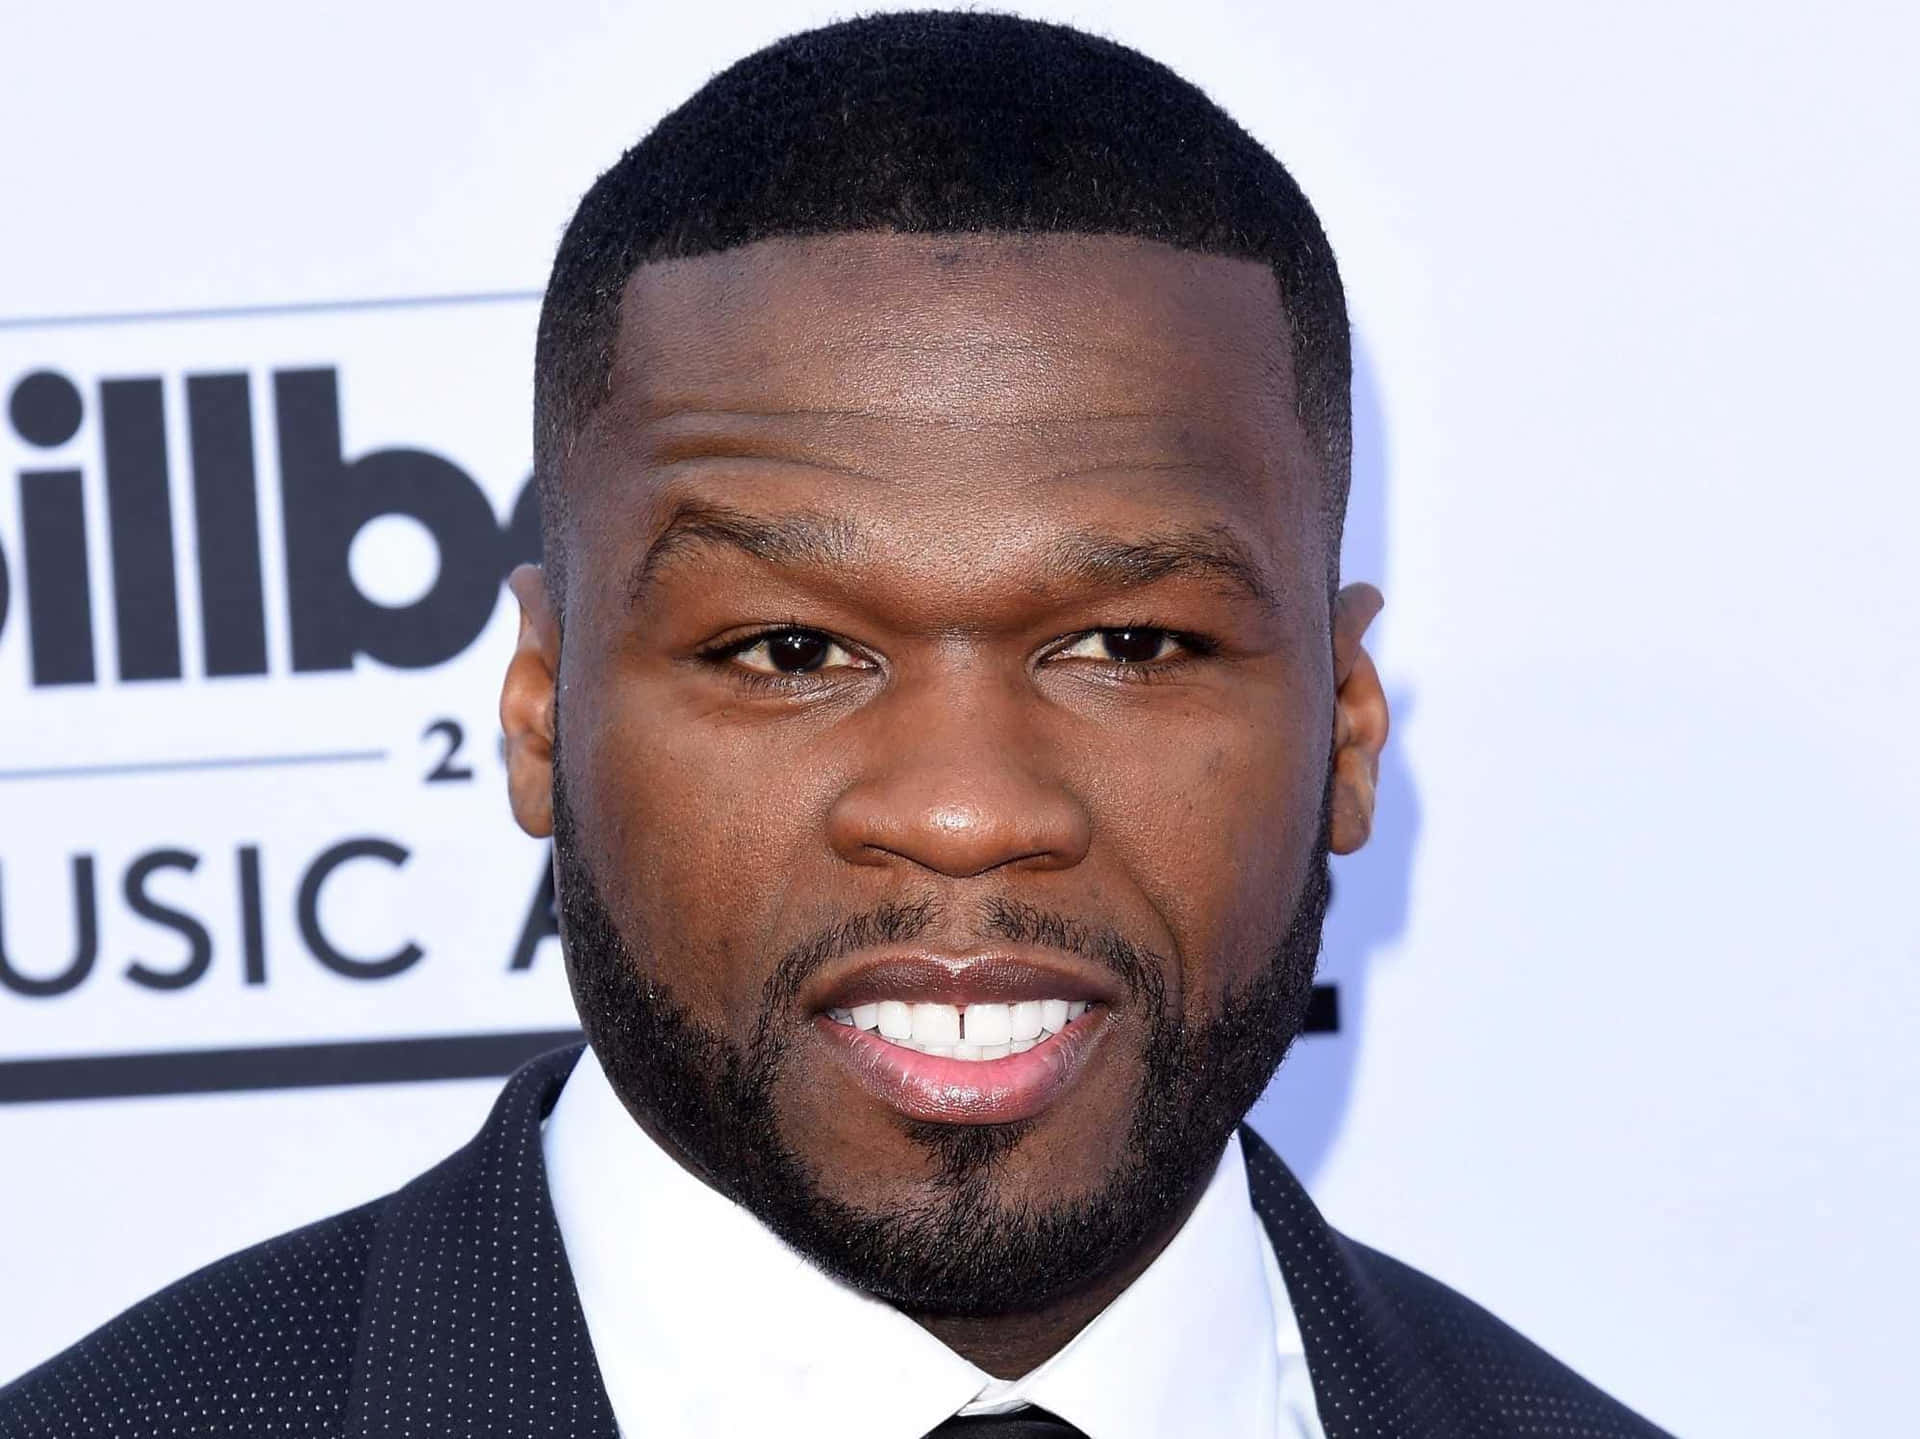 Download 50 Cent Pictures 1996 x 1496 | Wallpapers.com